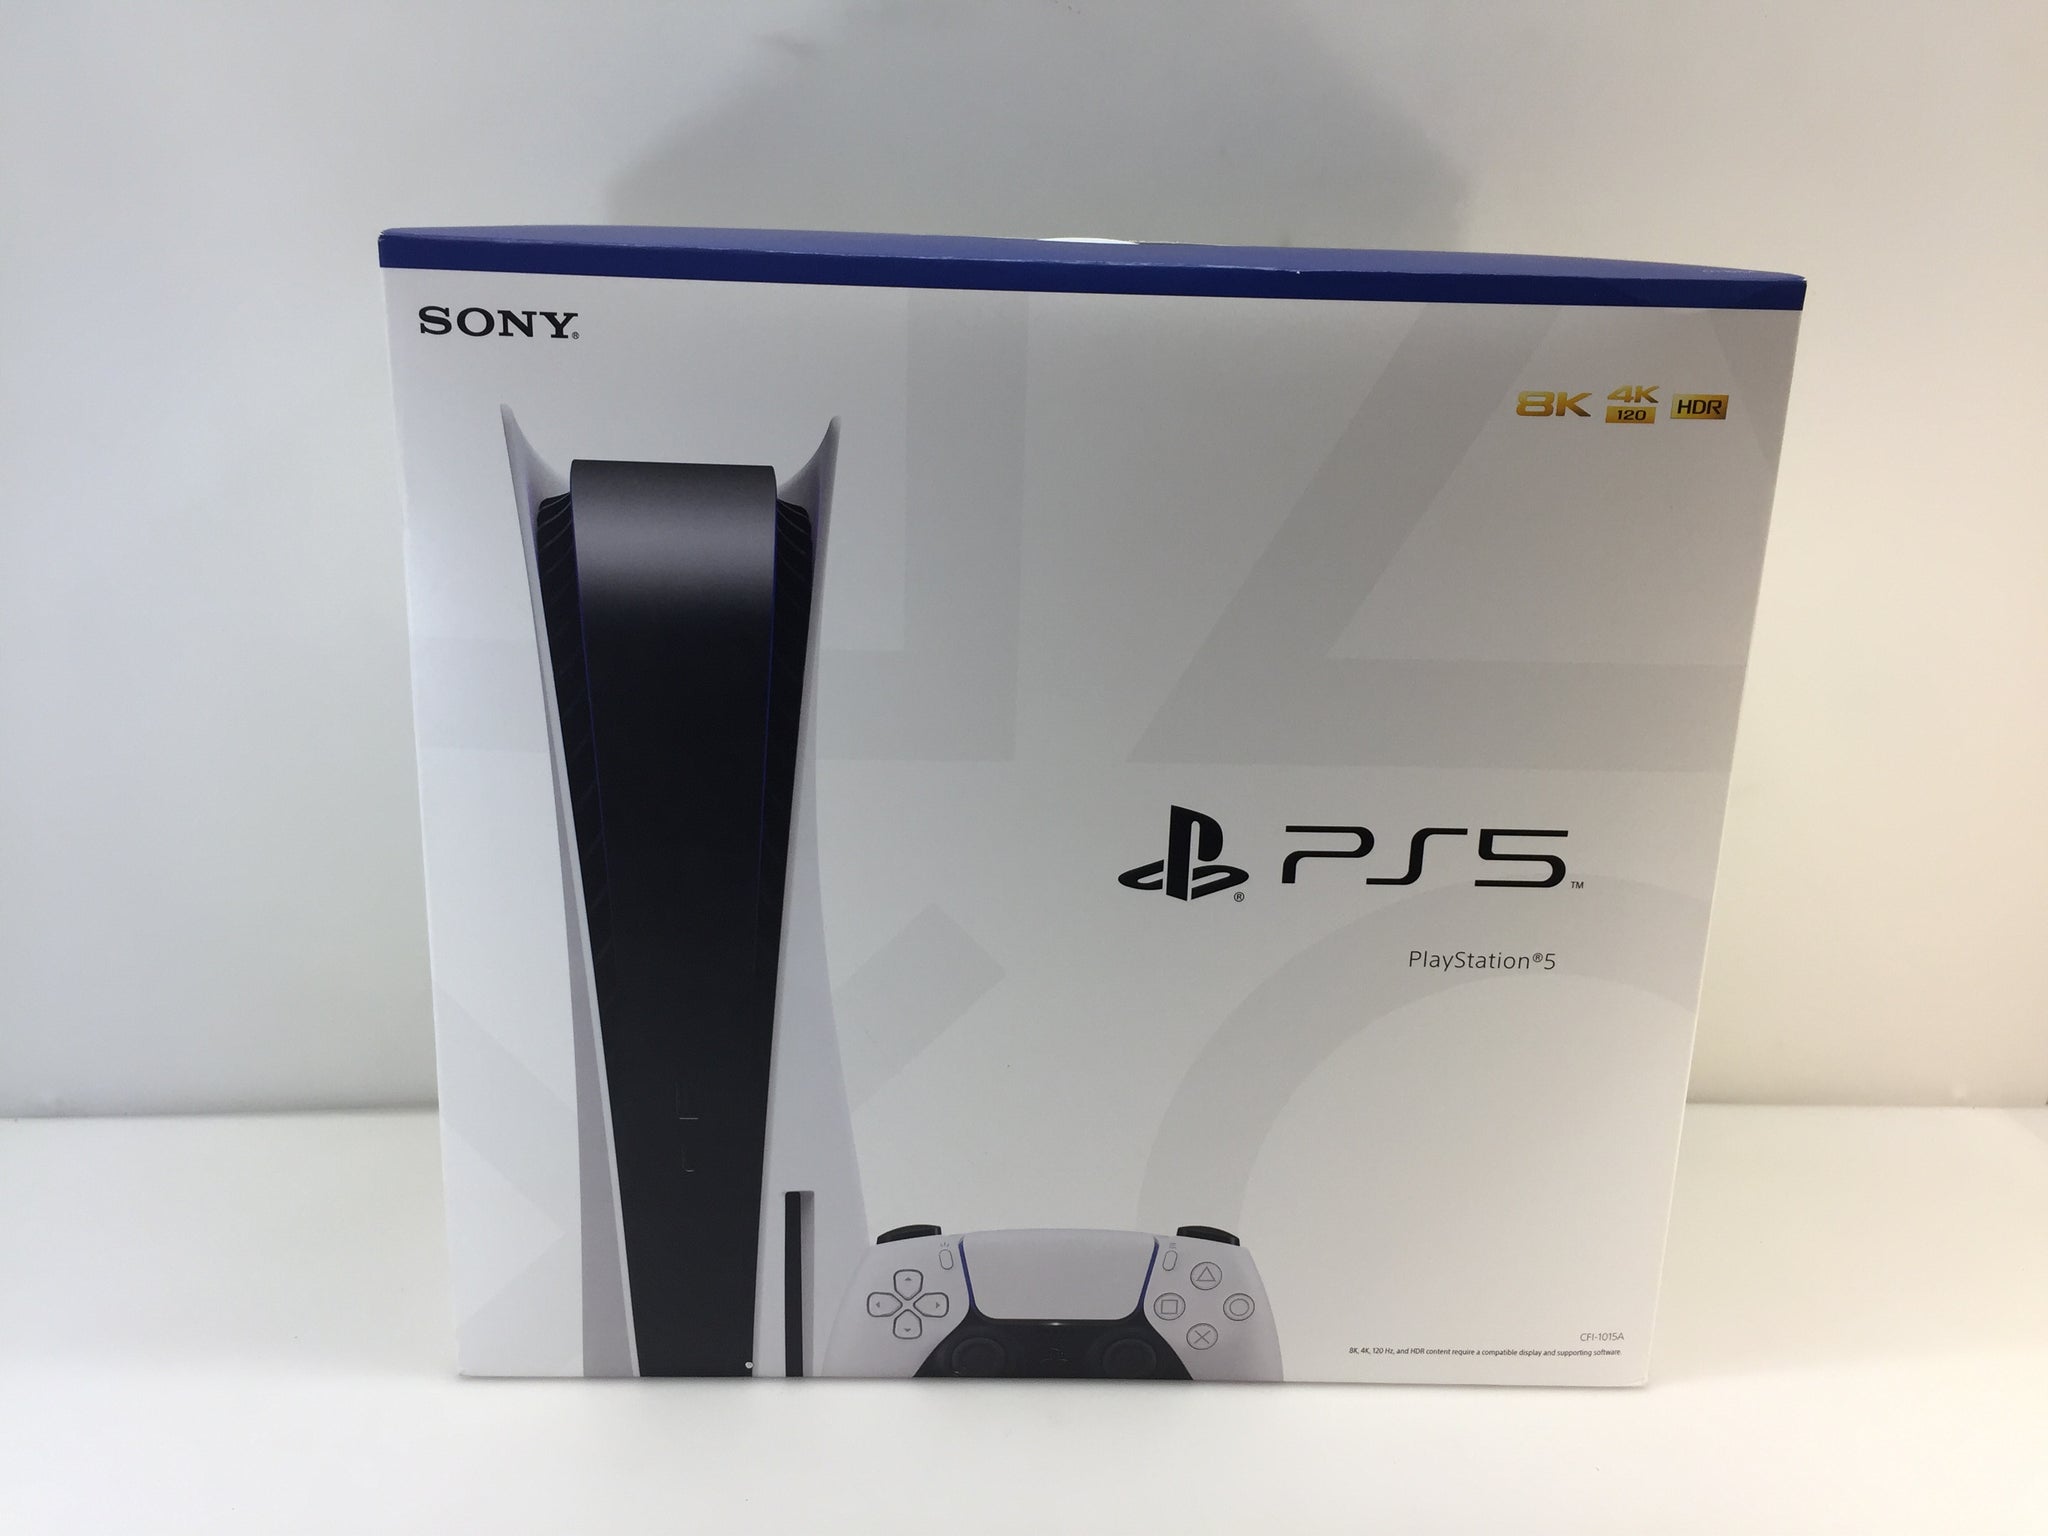 PS5 SONY PLAYSTATION 5 CENTER CHASIS CFI-1015A - GRADE B USED 